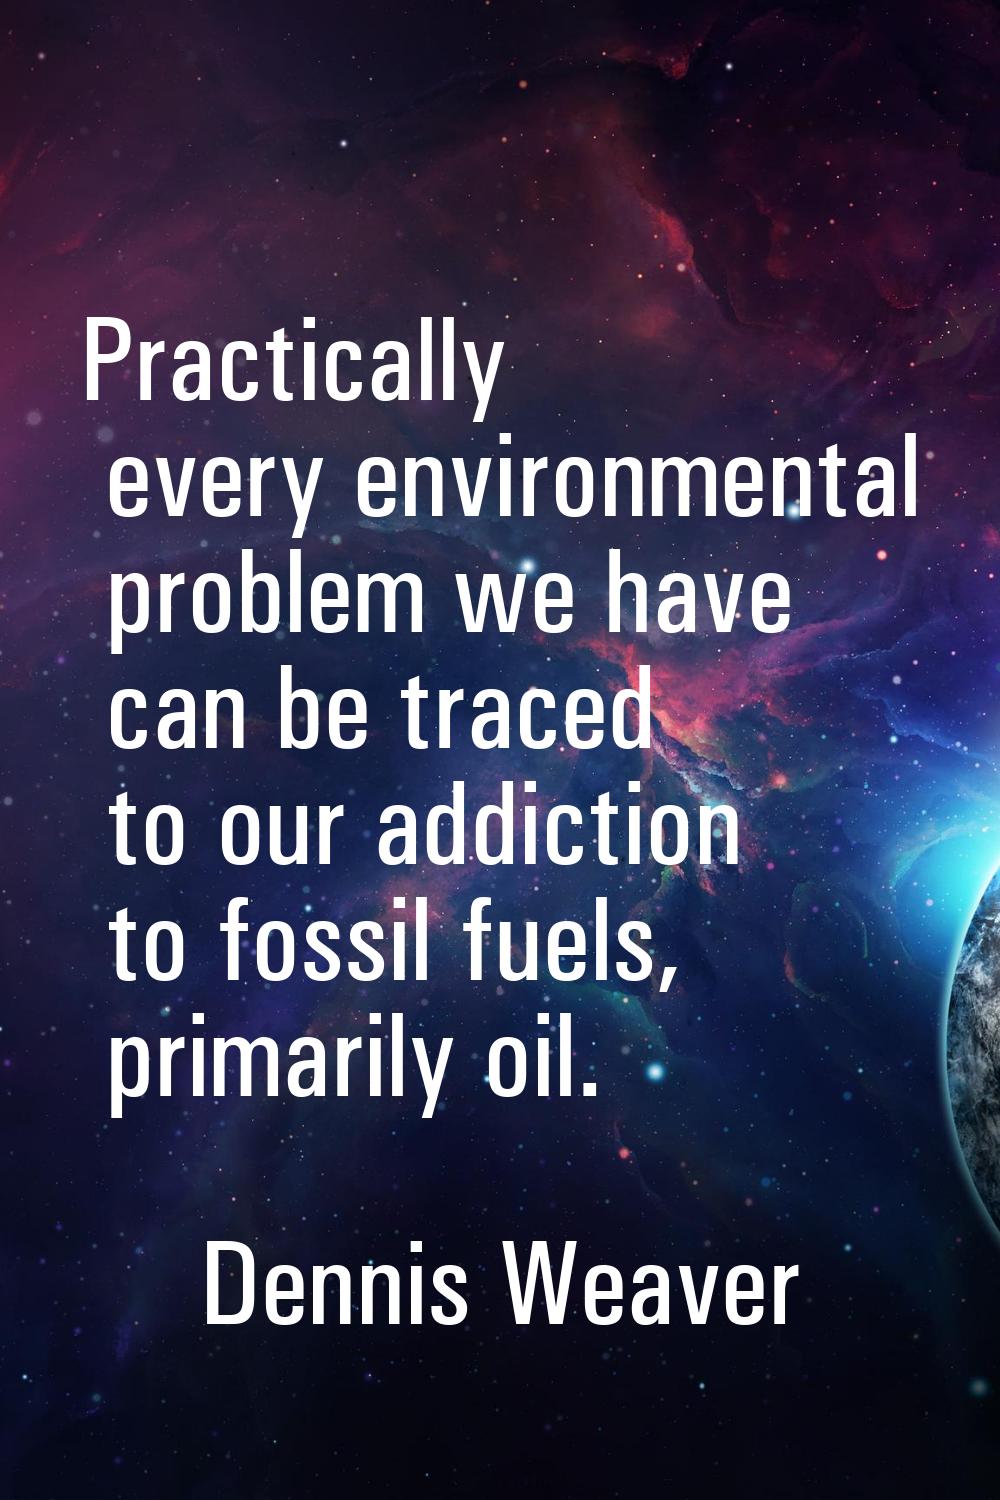 Practically every environmental problem we have can be traced to our addiction to fossil fuels, pri